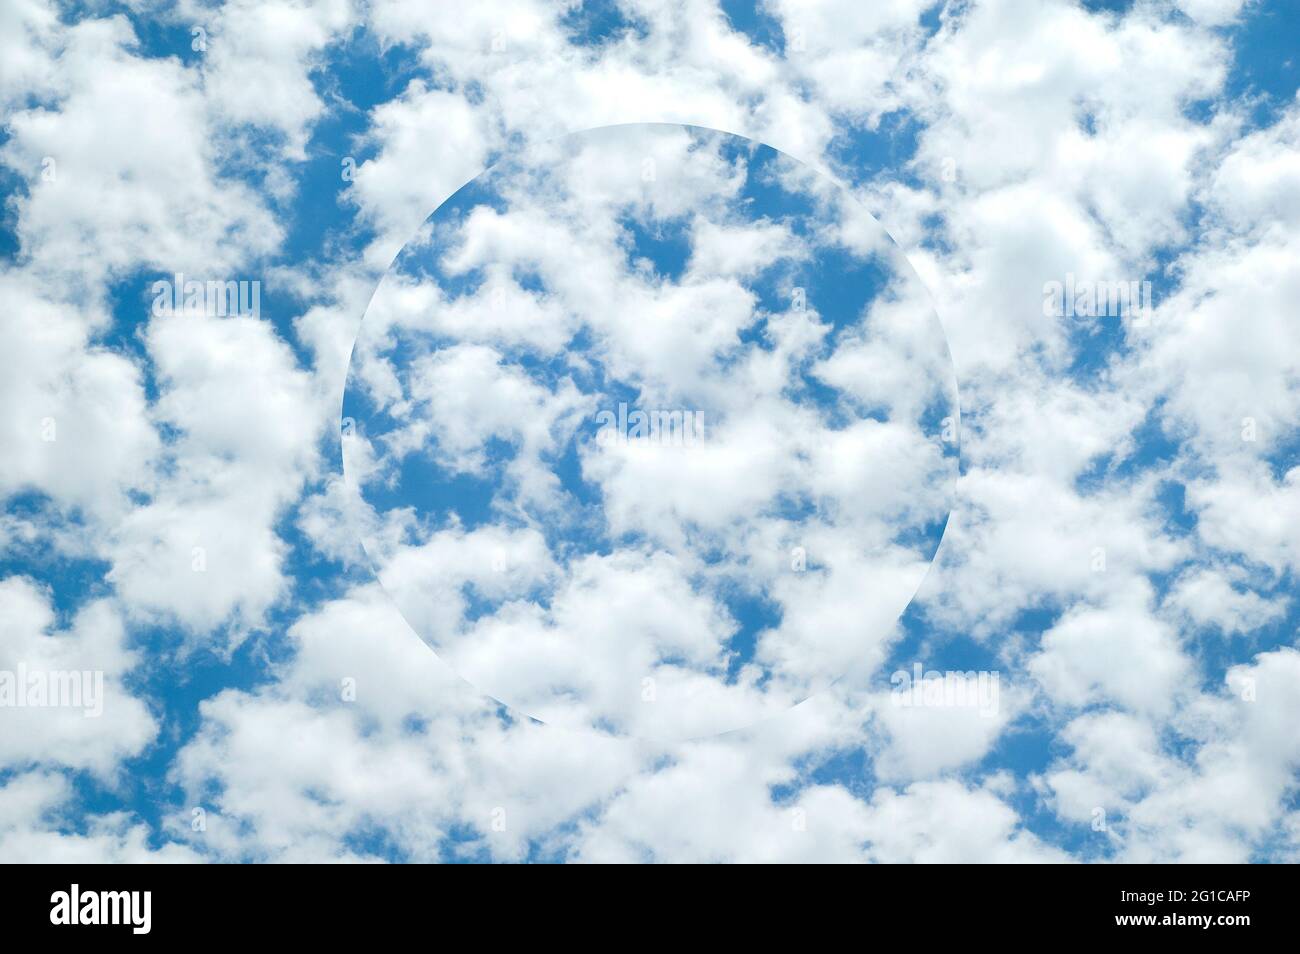 Abstract clouds sky background with illusionary sphere Stock Photo